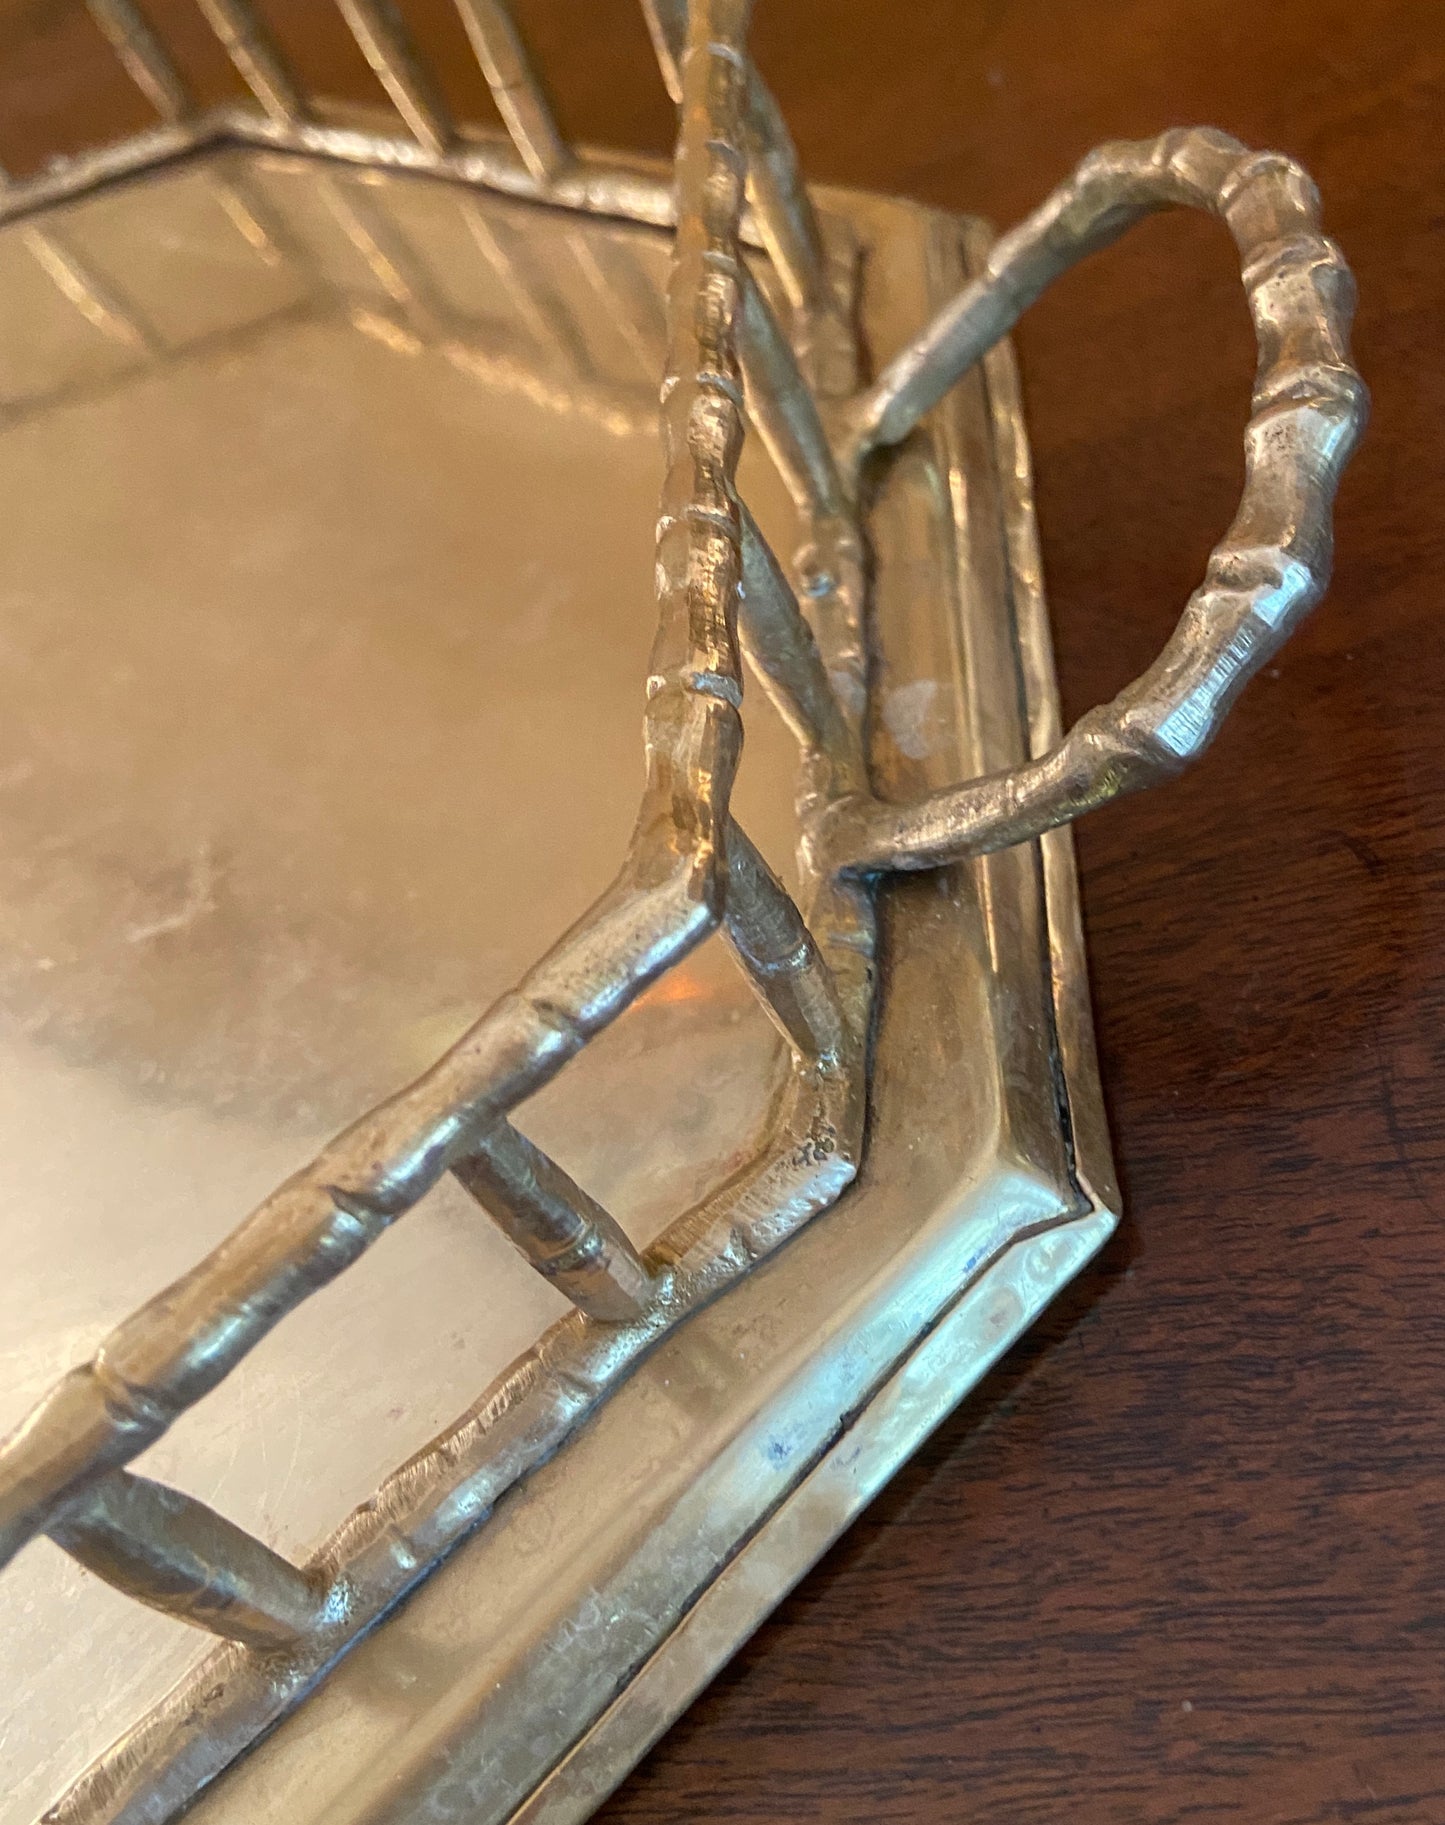 Vintage Brass Bamboo Gallery Tray